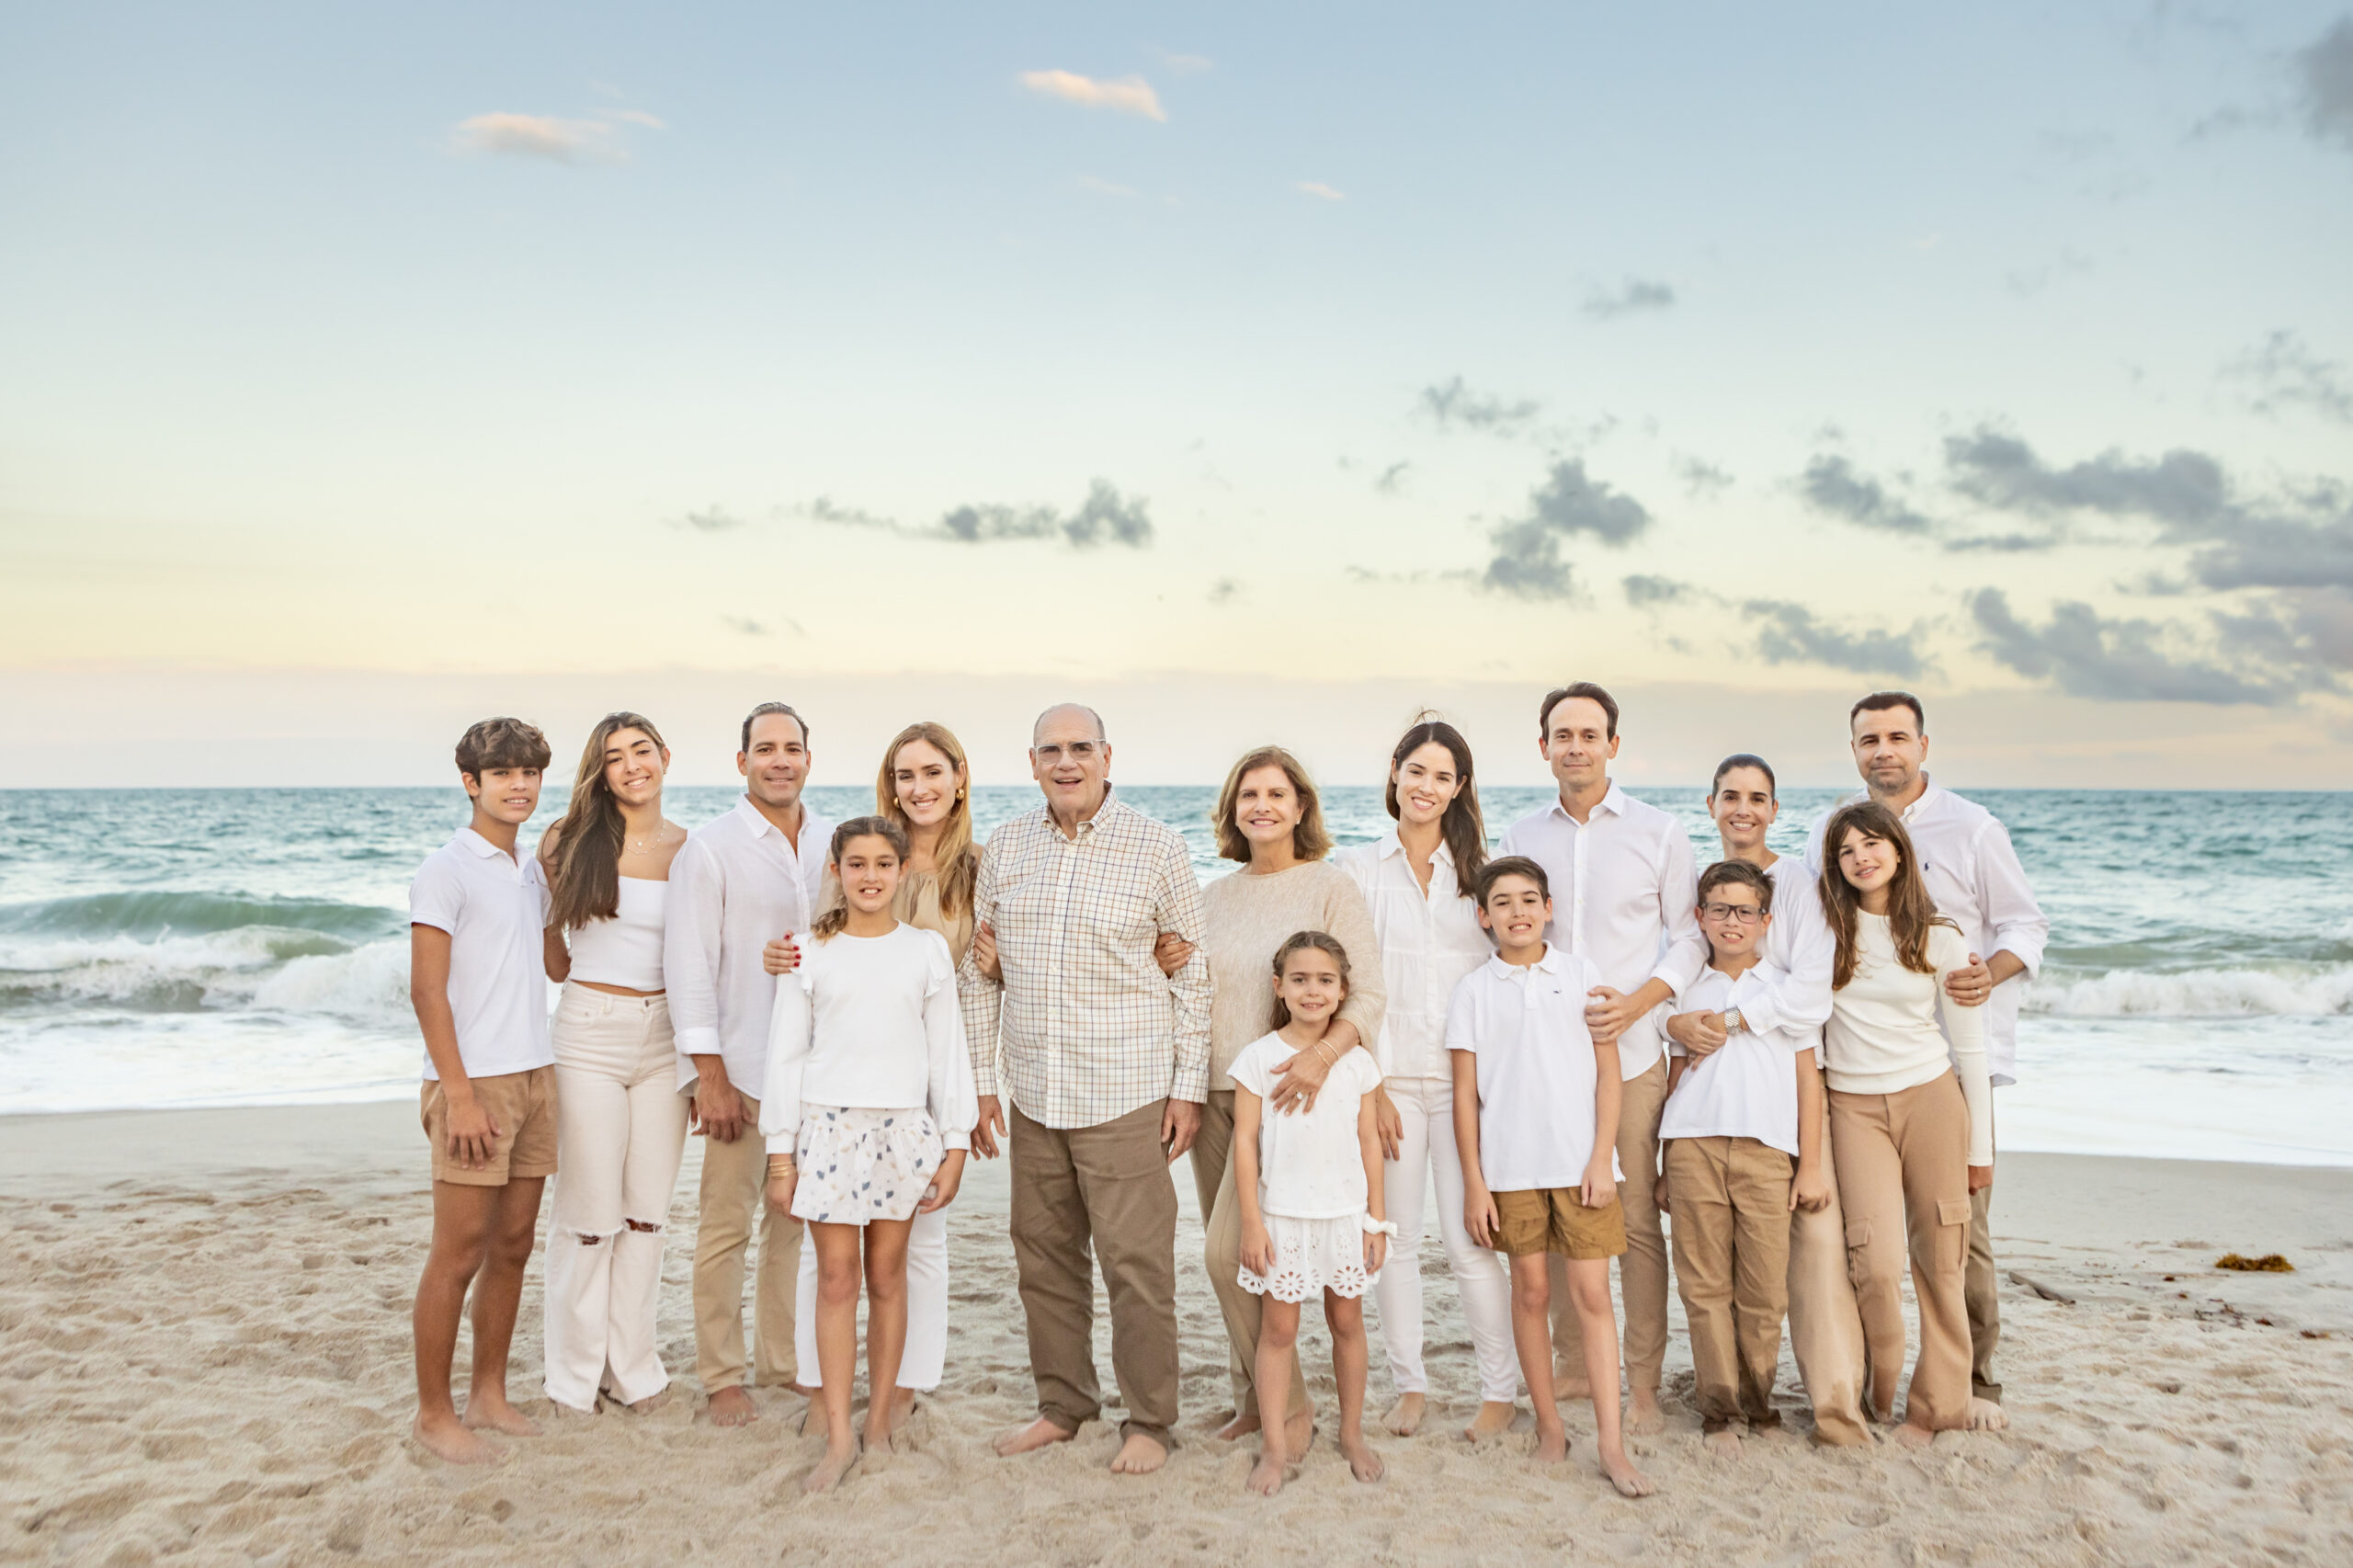 family portrait in Vero Beach with grandparents, kids and grandkids wearing white and khaki at sunset by the ocean